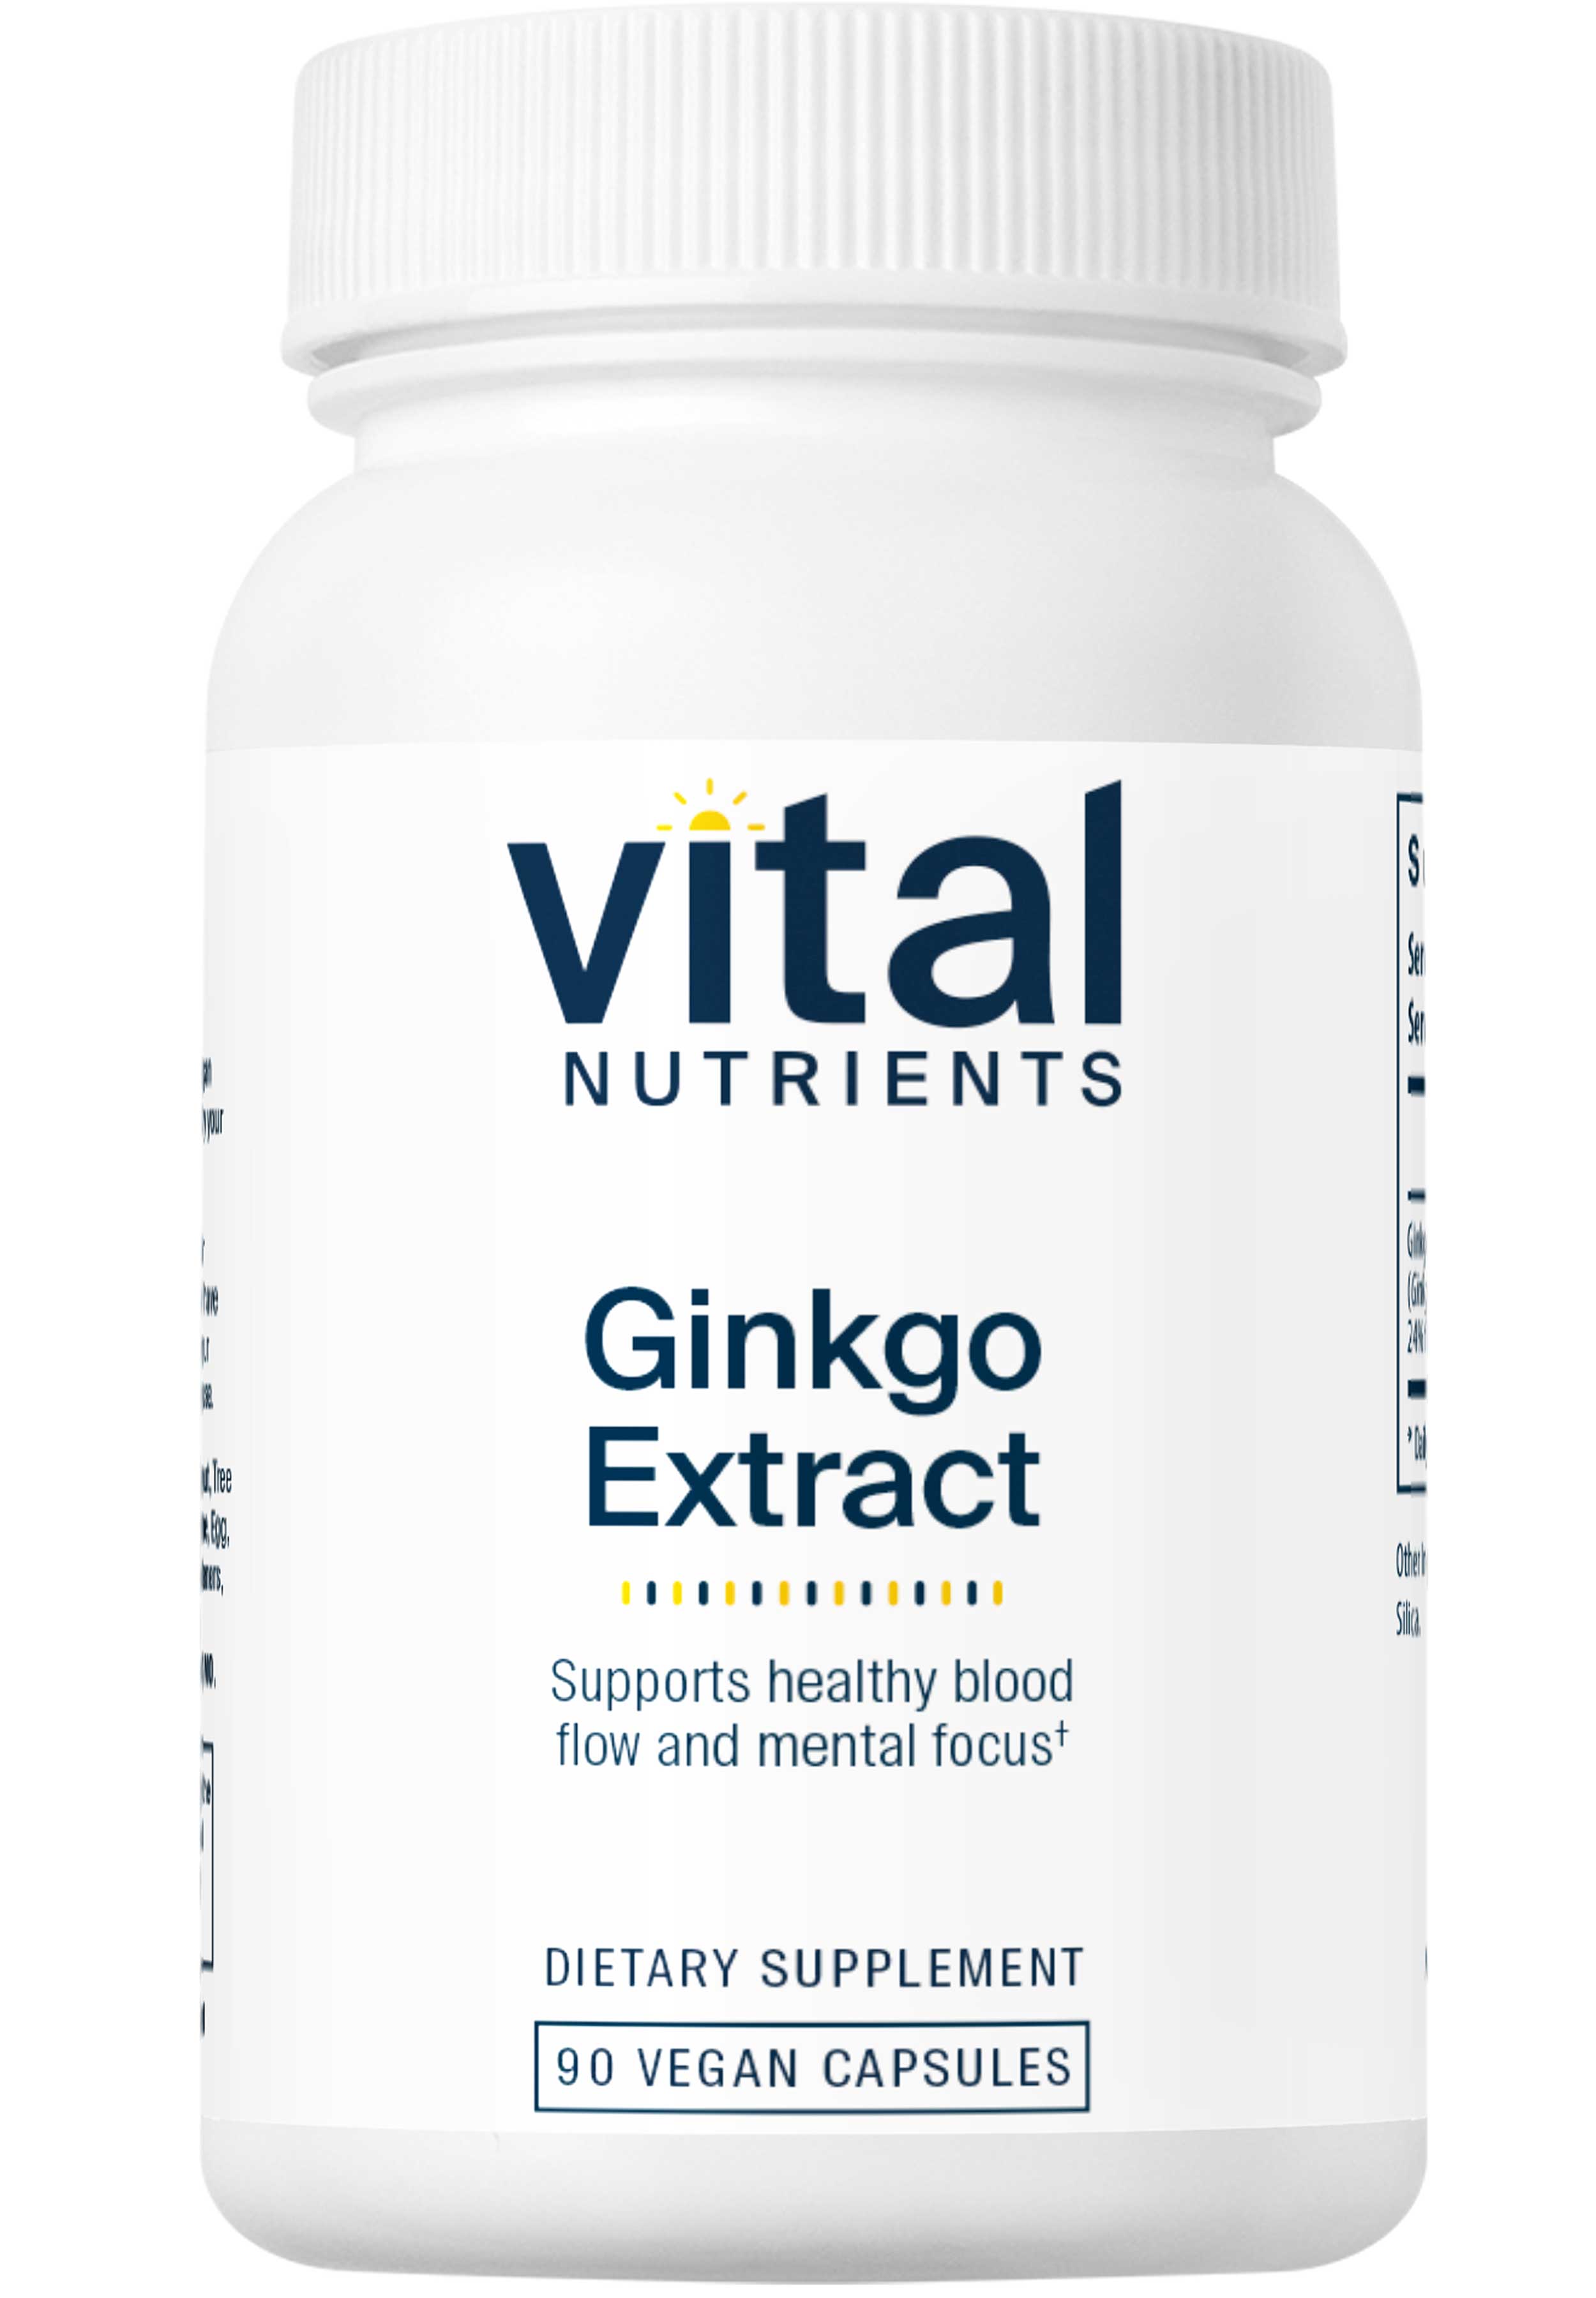 Vital Nutrients Ginkgo 50:1 Extract 80mg